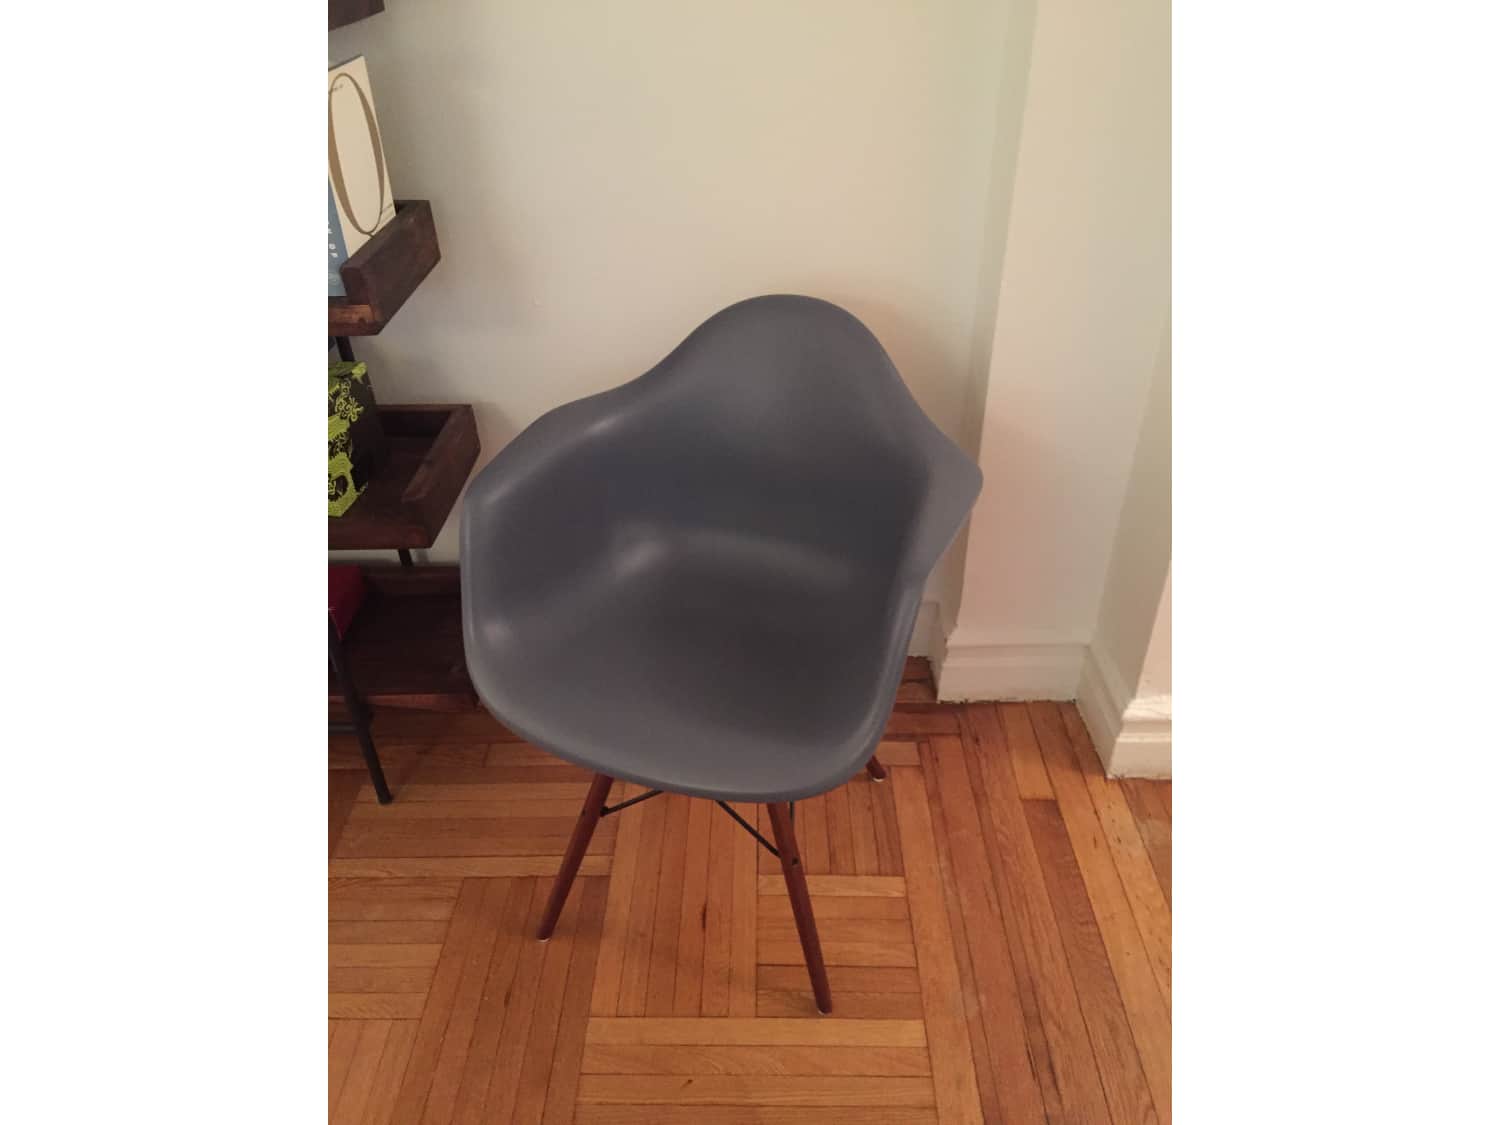 Set of 2 Eames style Molded Plastic Chairs - Apartment Therapy's Bazaar.